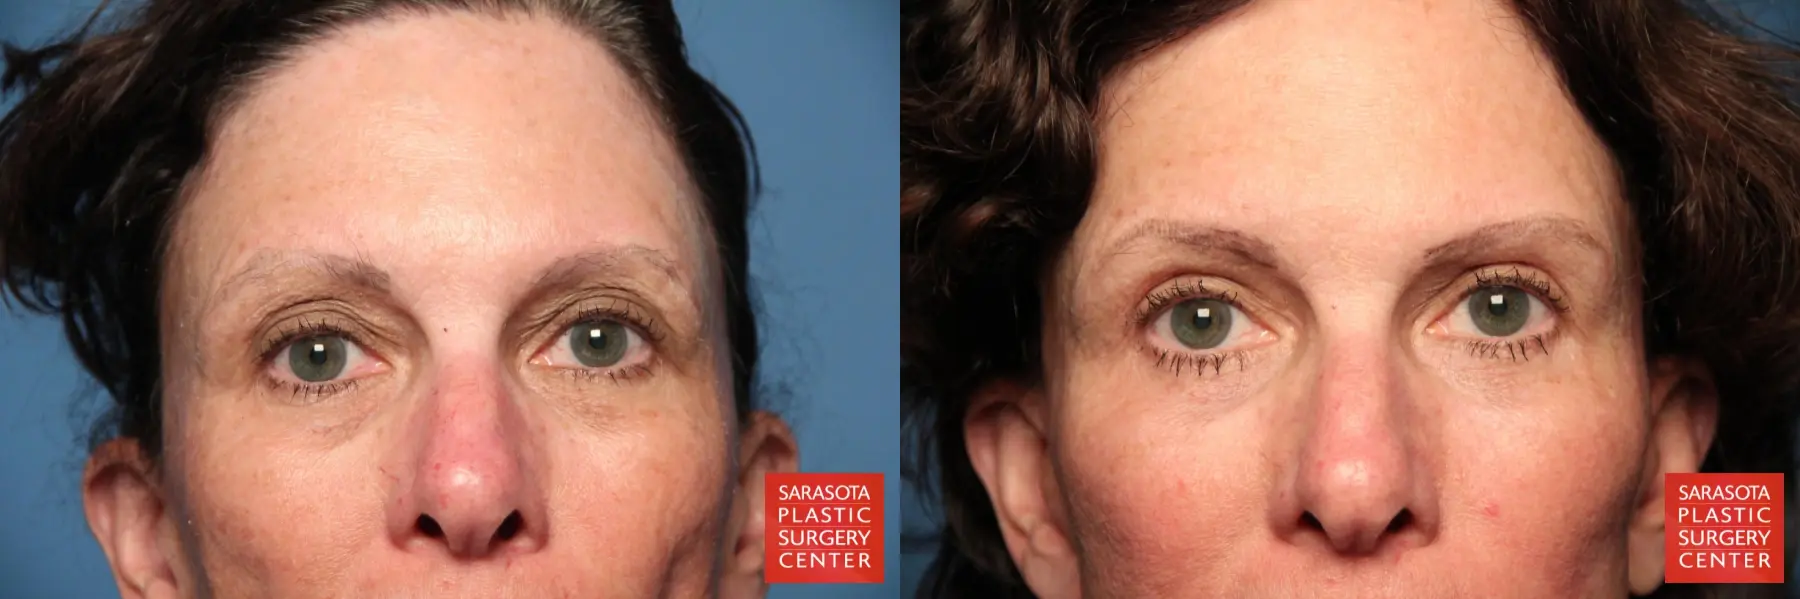 Eyelid Lift: Patient 8 - Before and After  